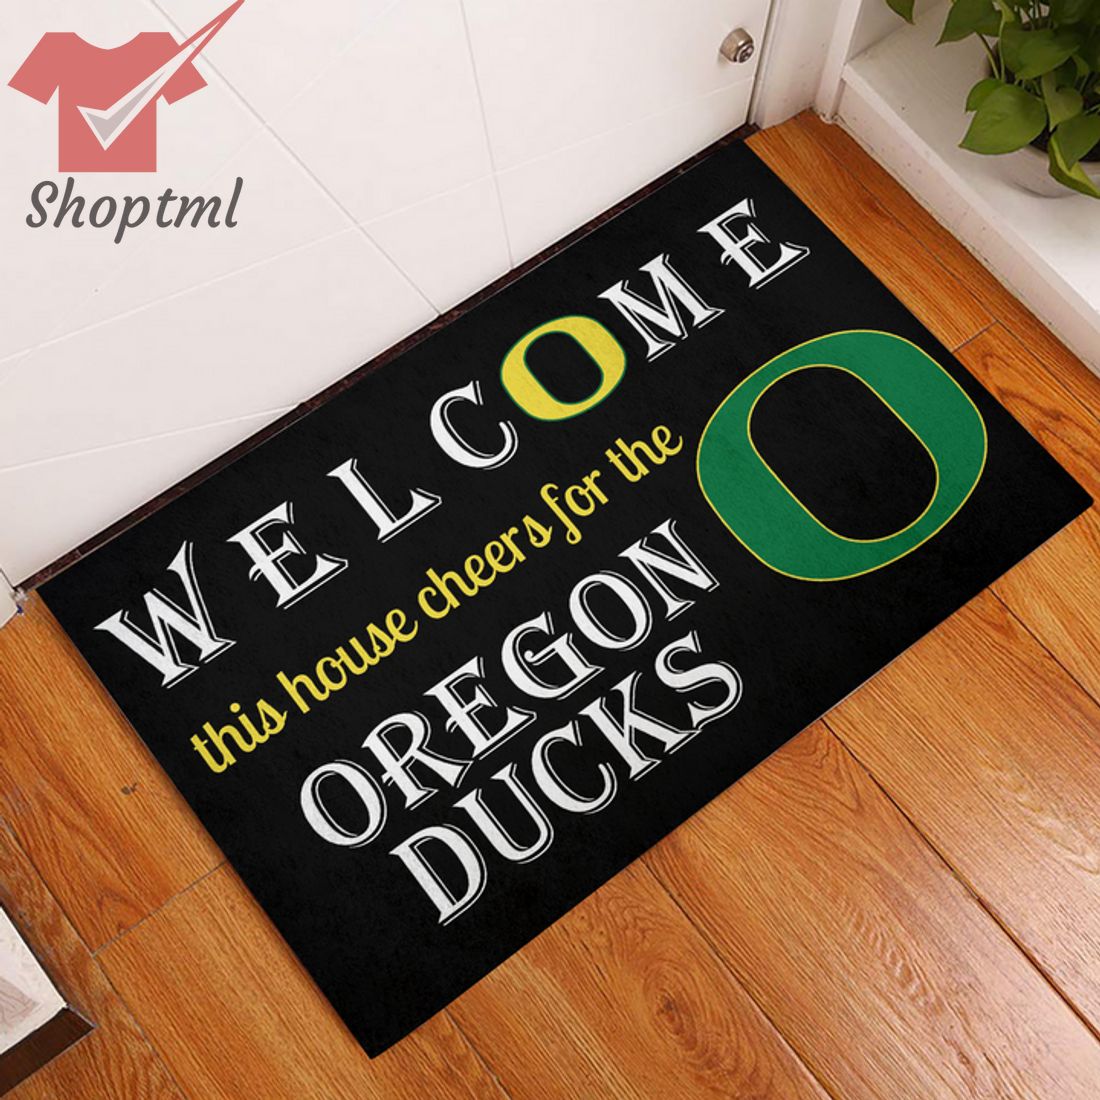 Welcome This House Cheers For The Oregon Ducks Doormat